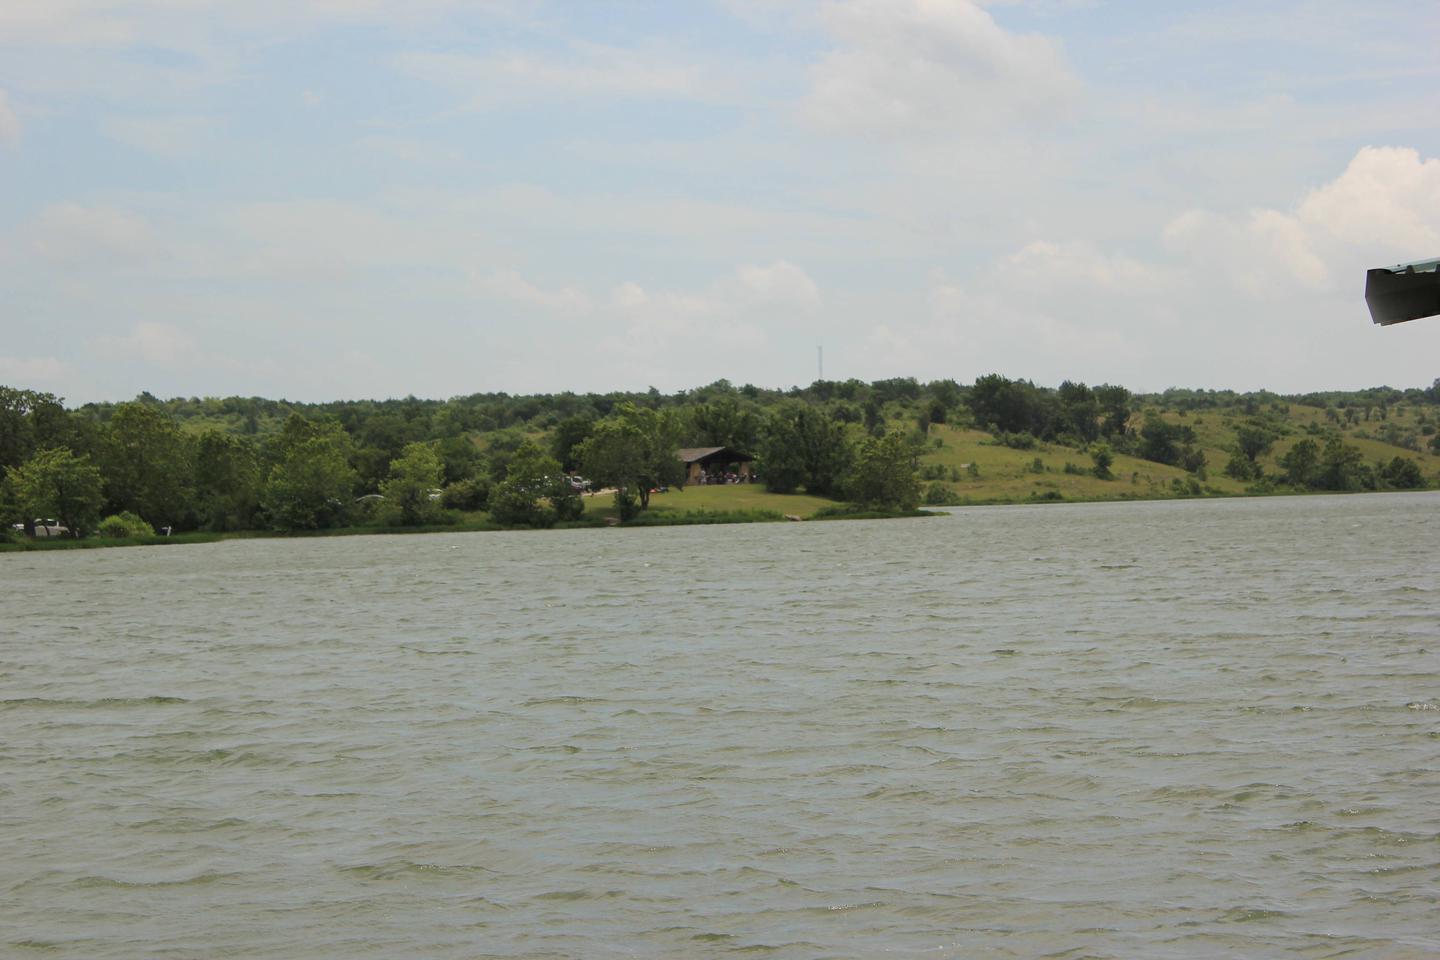 View of Pavilion from across Veteran's Lake